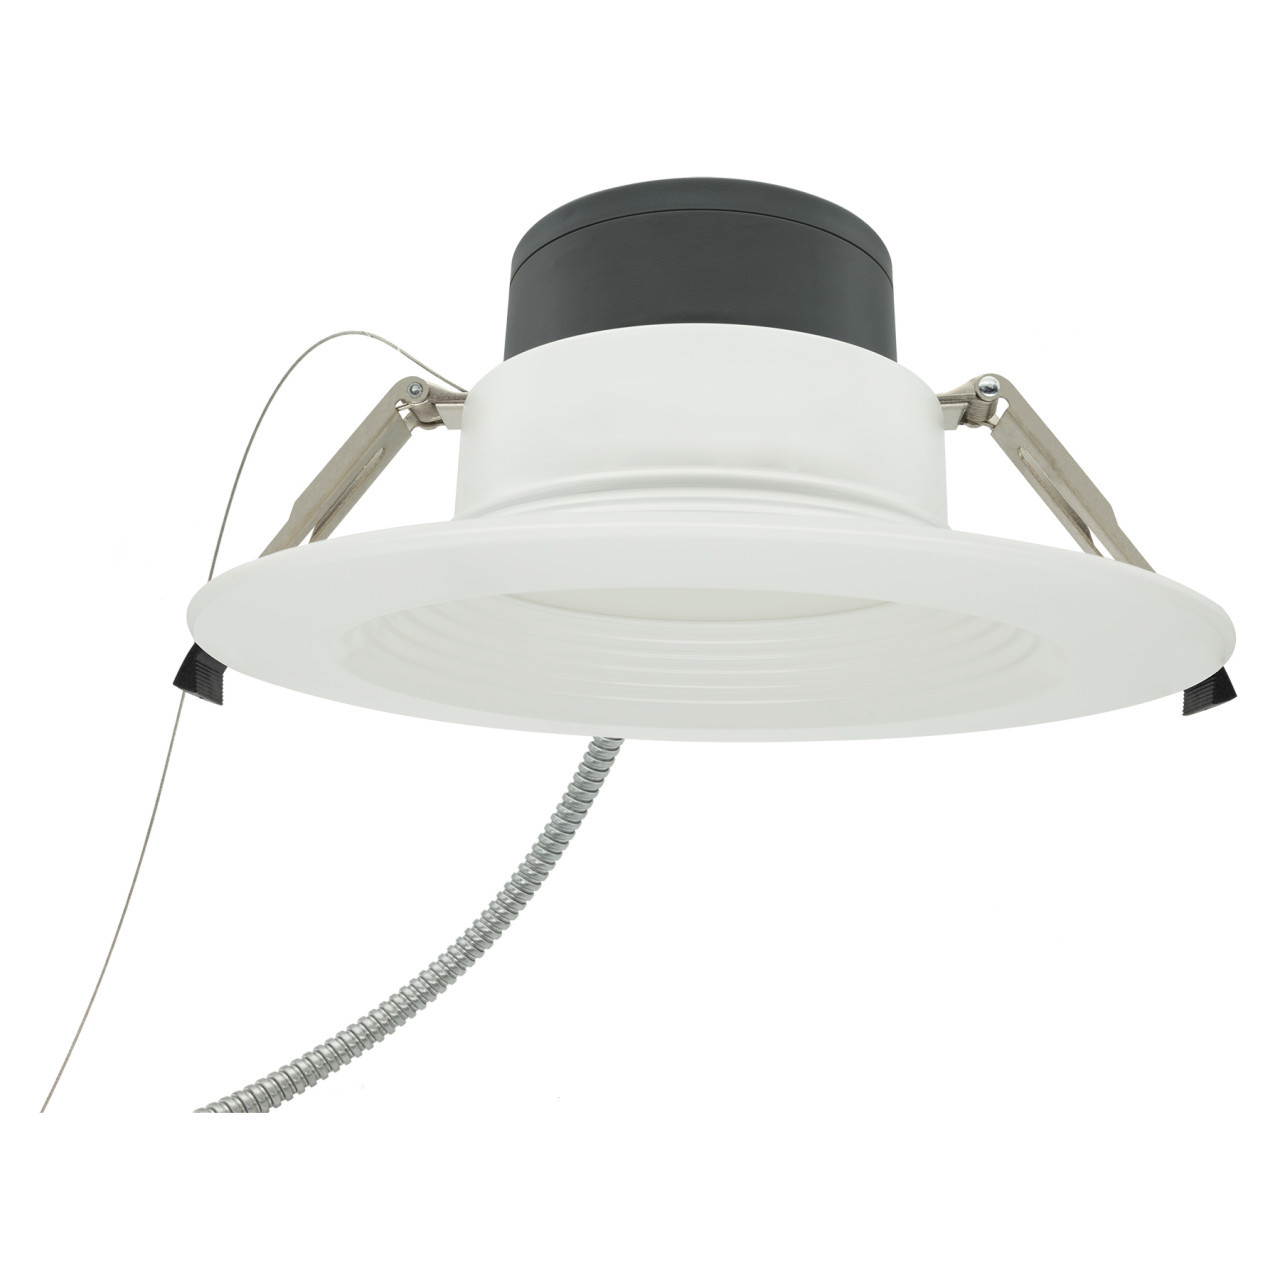 LED Architectural Downlight, Color Tunable